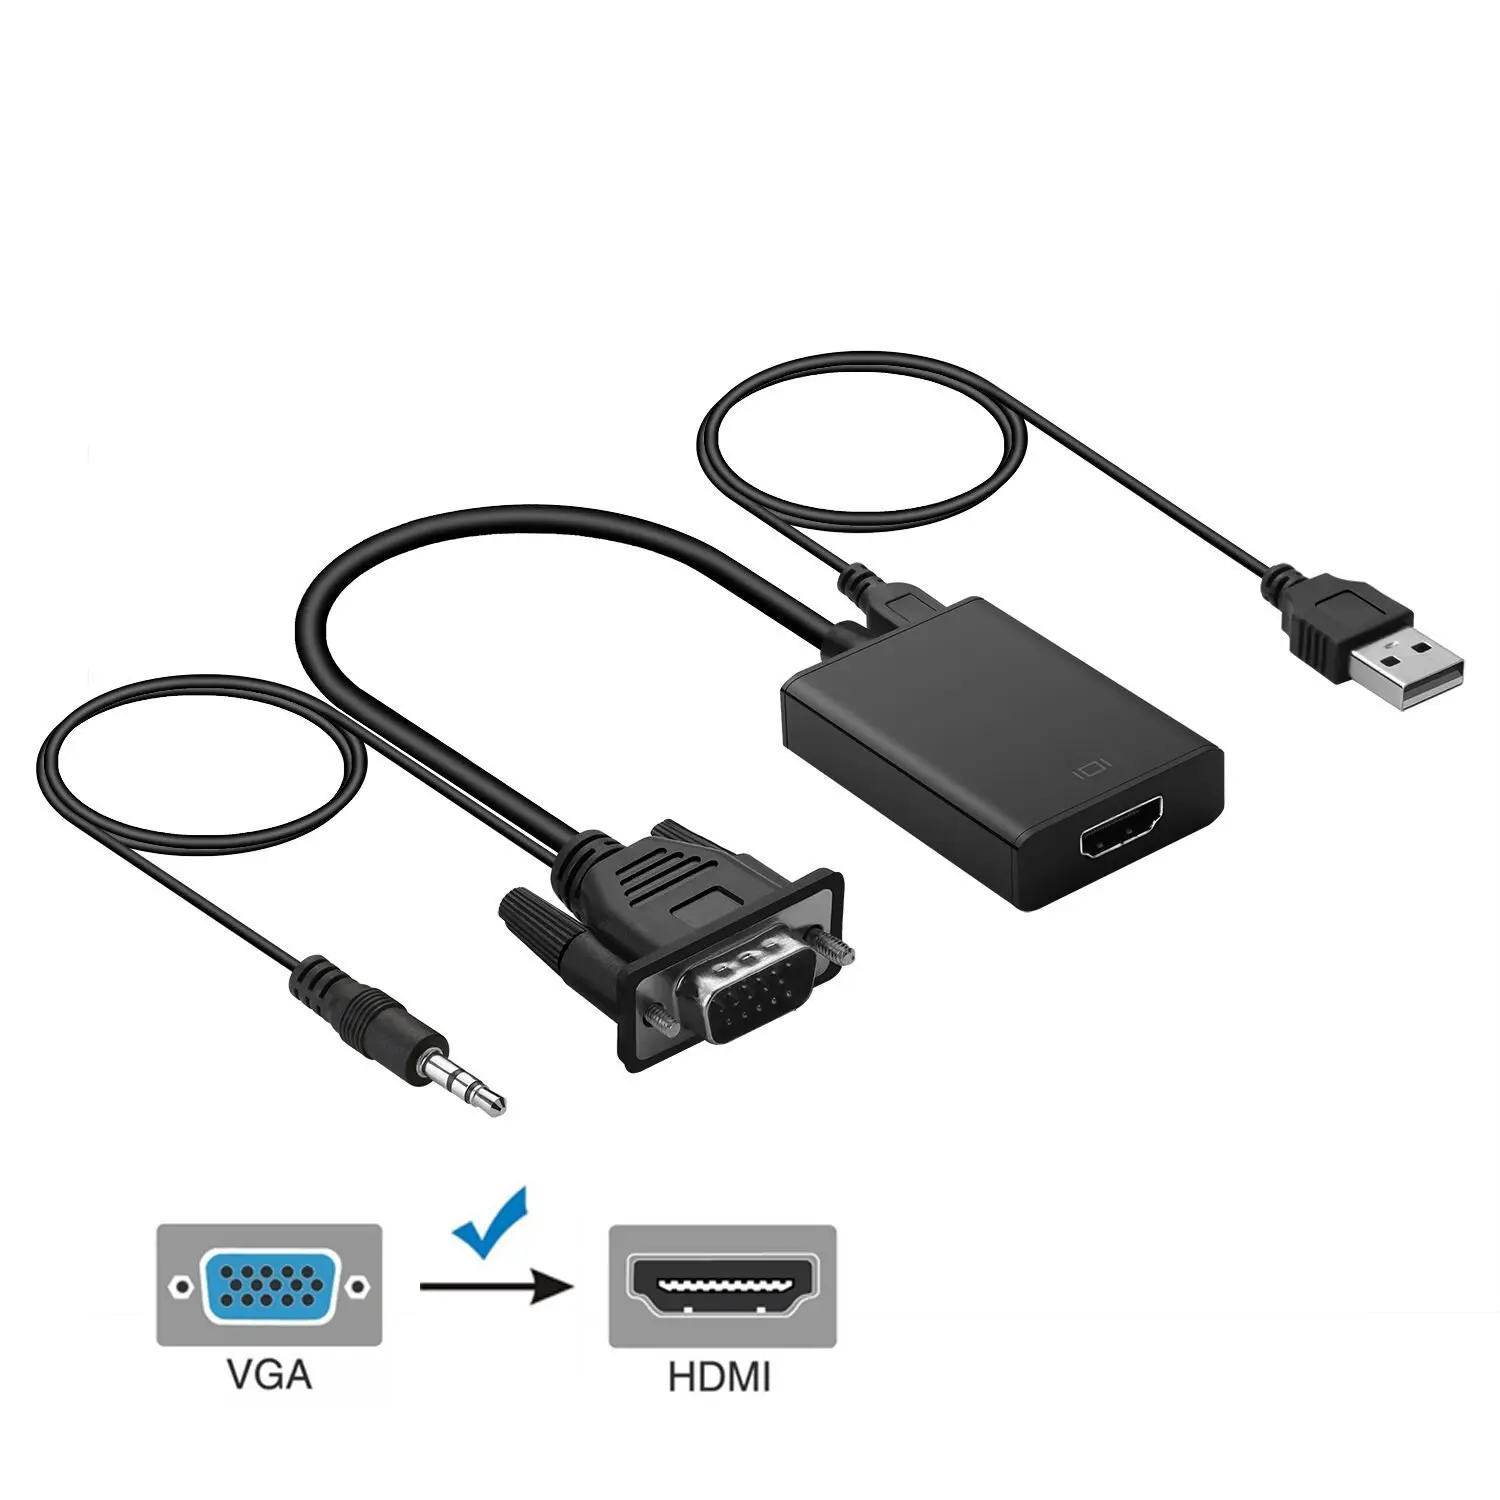 TOP VGA To HDMI Output 1080P HD Audio TV AV HDTV Video Cable Converter Adapter for Connecting PC Laptop Notebook to Di | Электроника